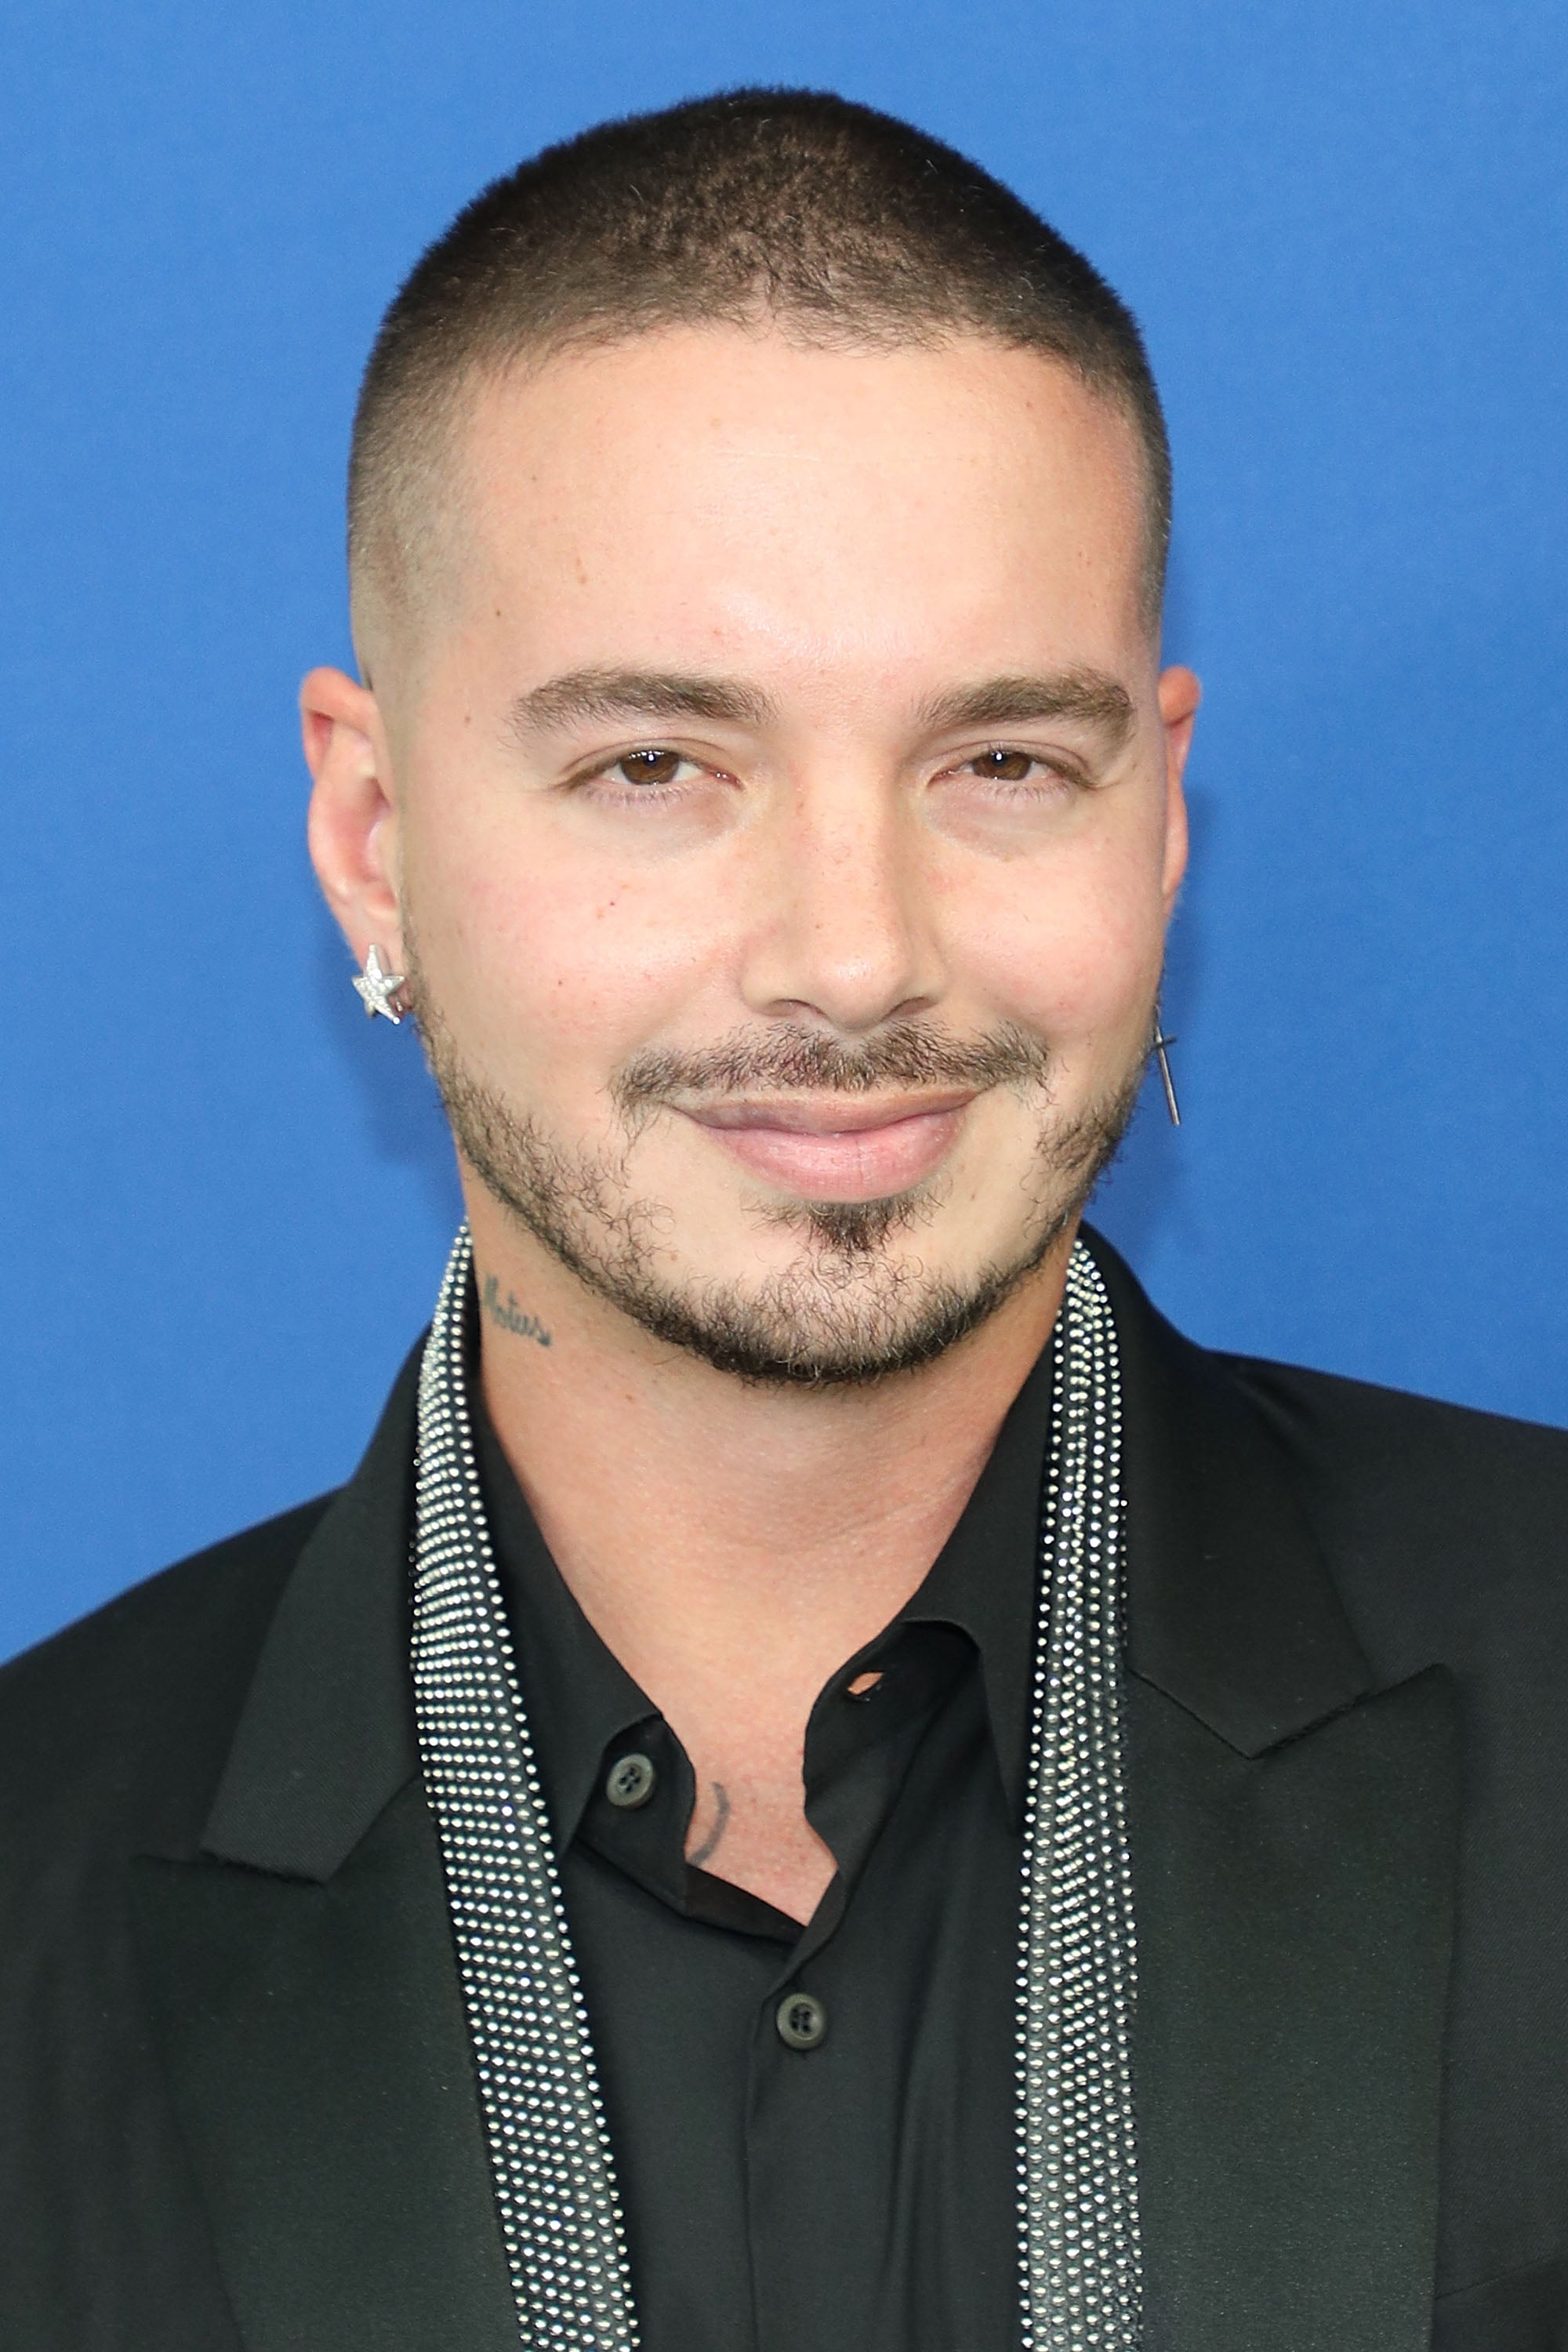 Celebrity Gossip & News  These 48 Pictures of J Balvin Are So Hot